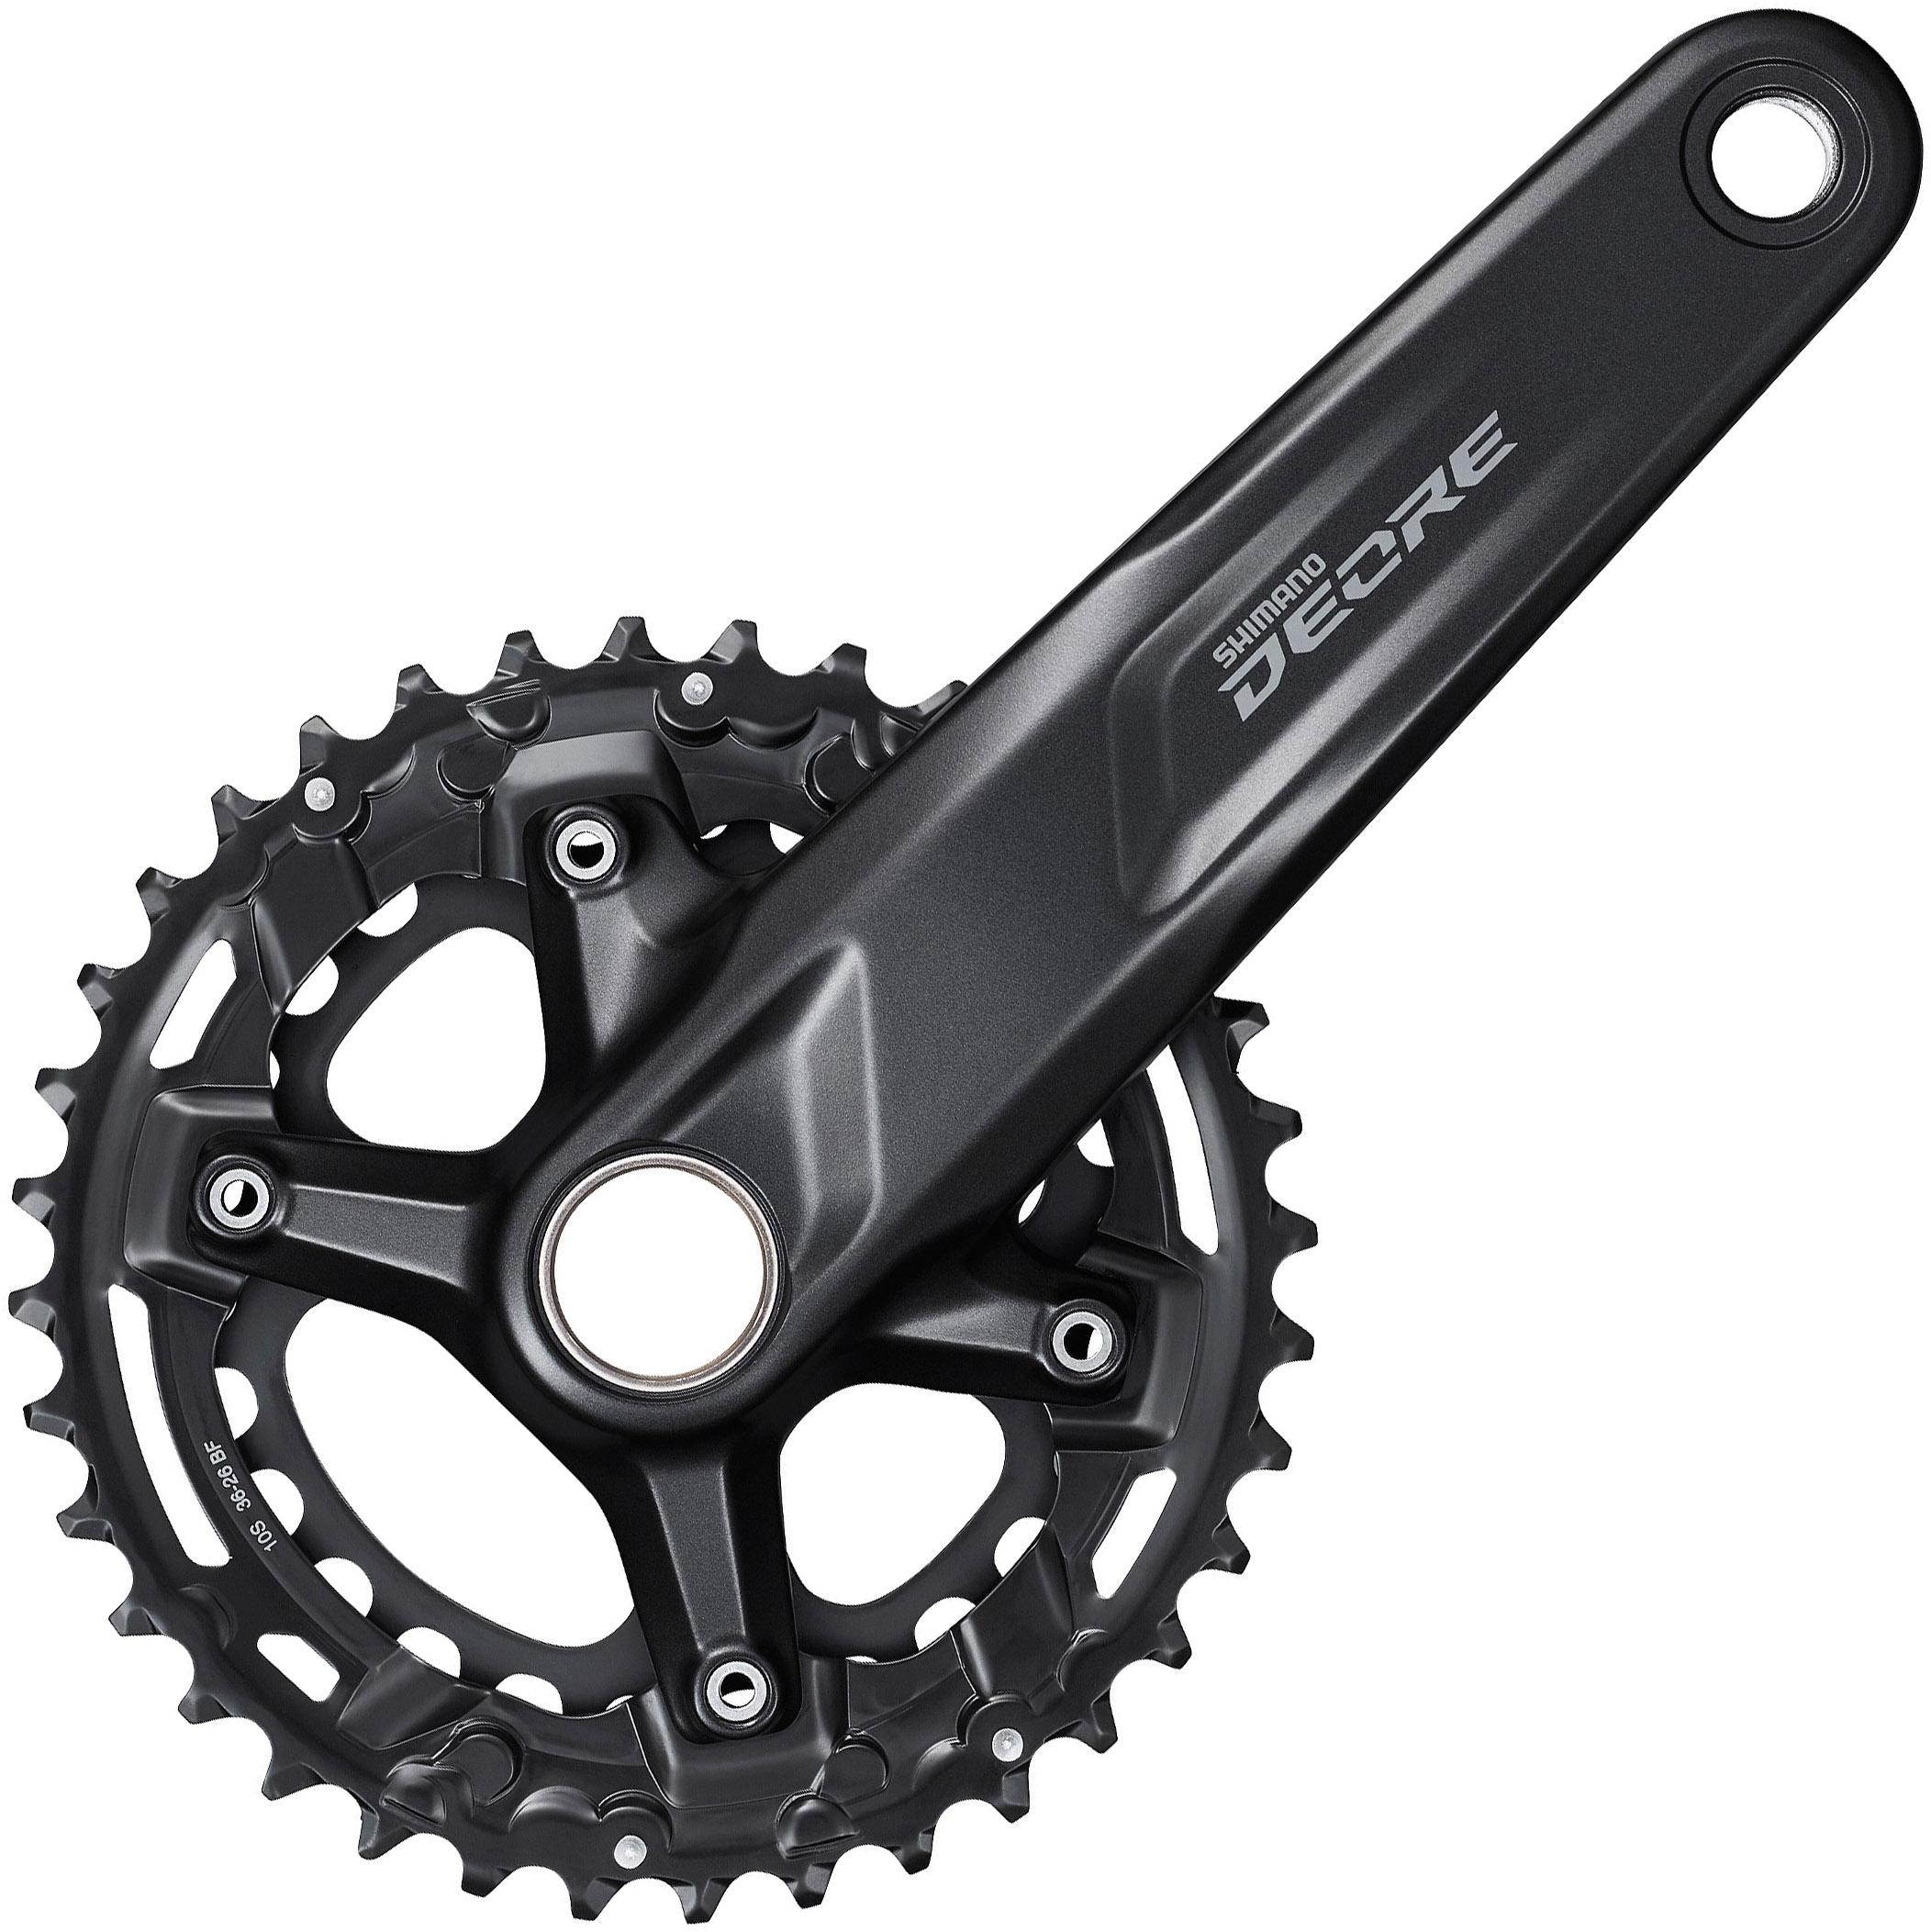 Shimano M4100 Deore 10 Speed Boost Double Chainset - Black